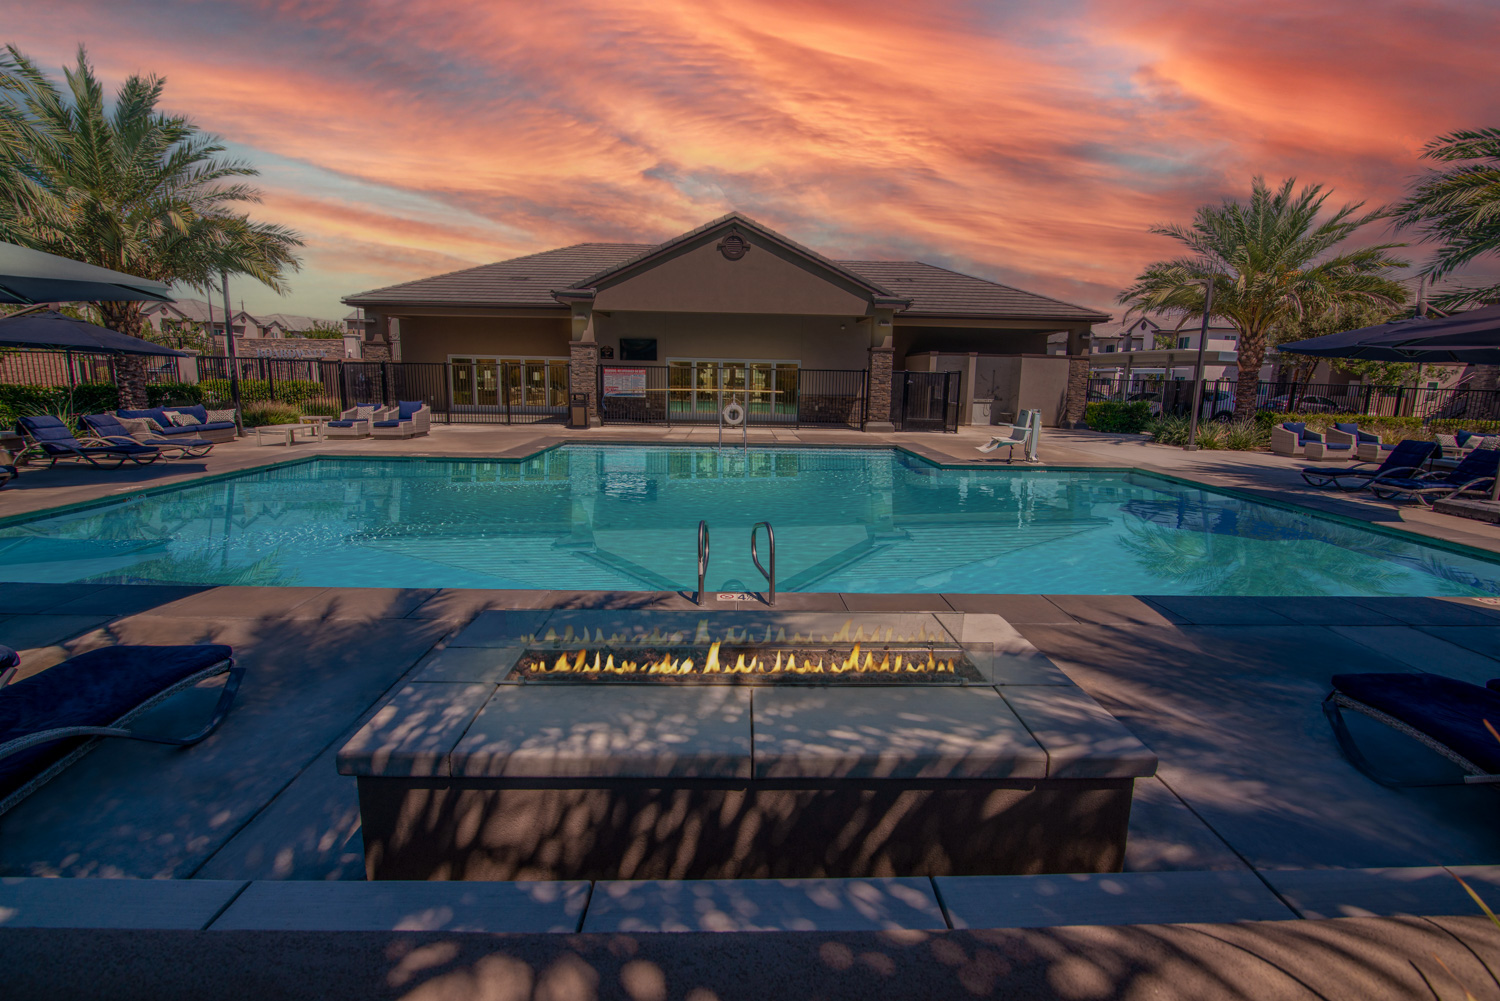 The after photograph of the same recreational area vividly demonstrates enhancements, featuring a spectacular sky, reflections in the pool, and visible flames in the fire, creating an inviting and captivating environment that beckons viewers to live here.